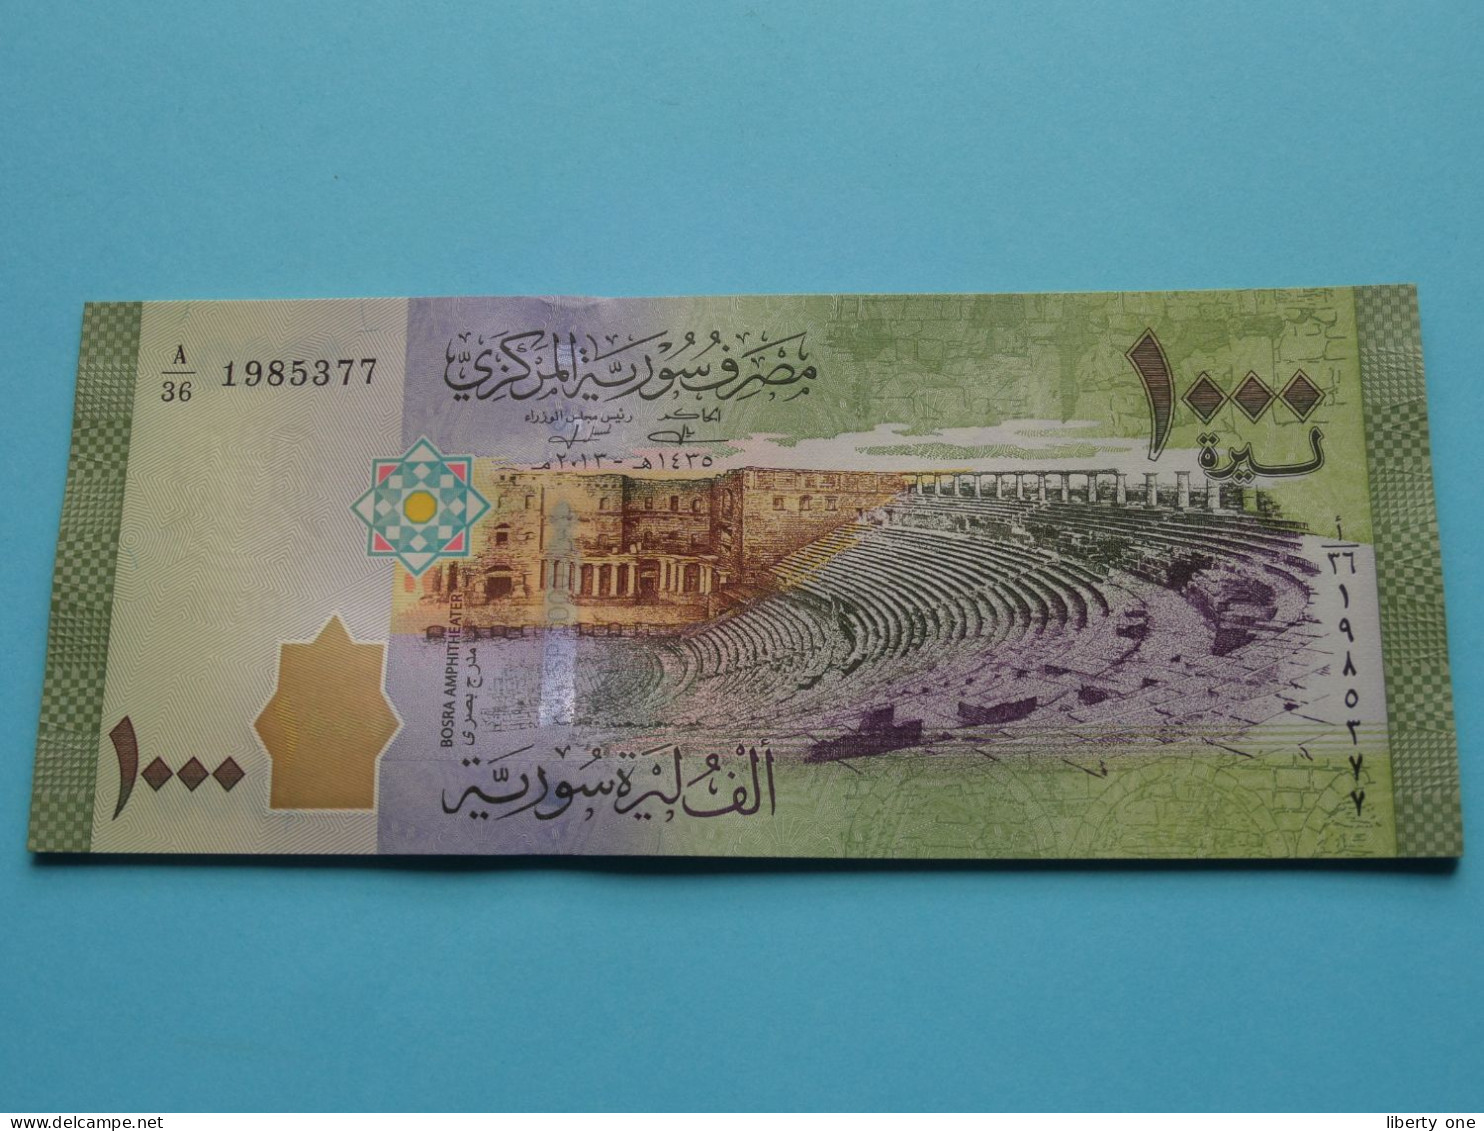 1000 ( One Thousand ) Syrian Pounds > 2013 > Central Bank Of Syria ( For Grade, Please See Photo ) UNC ! - Syria